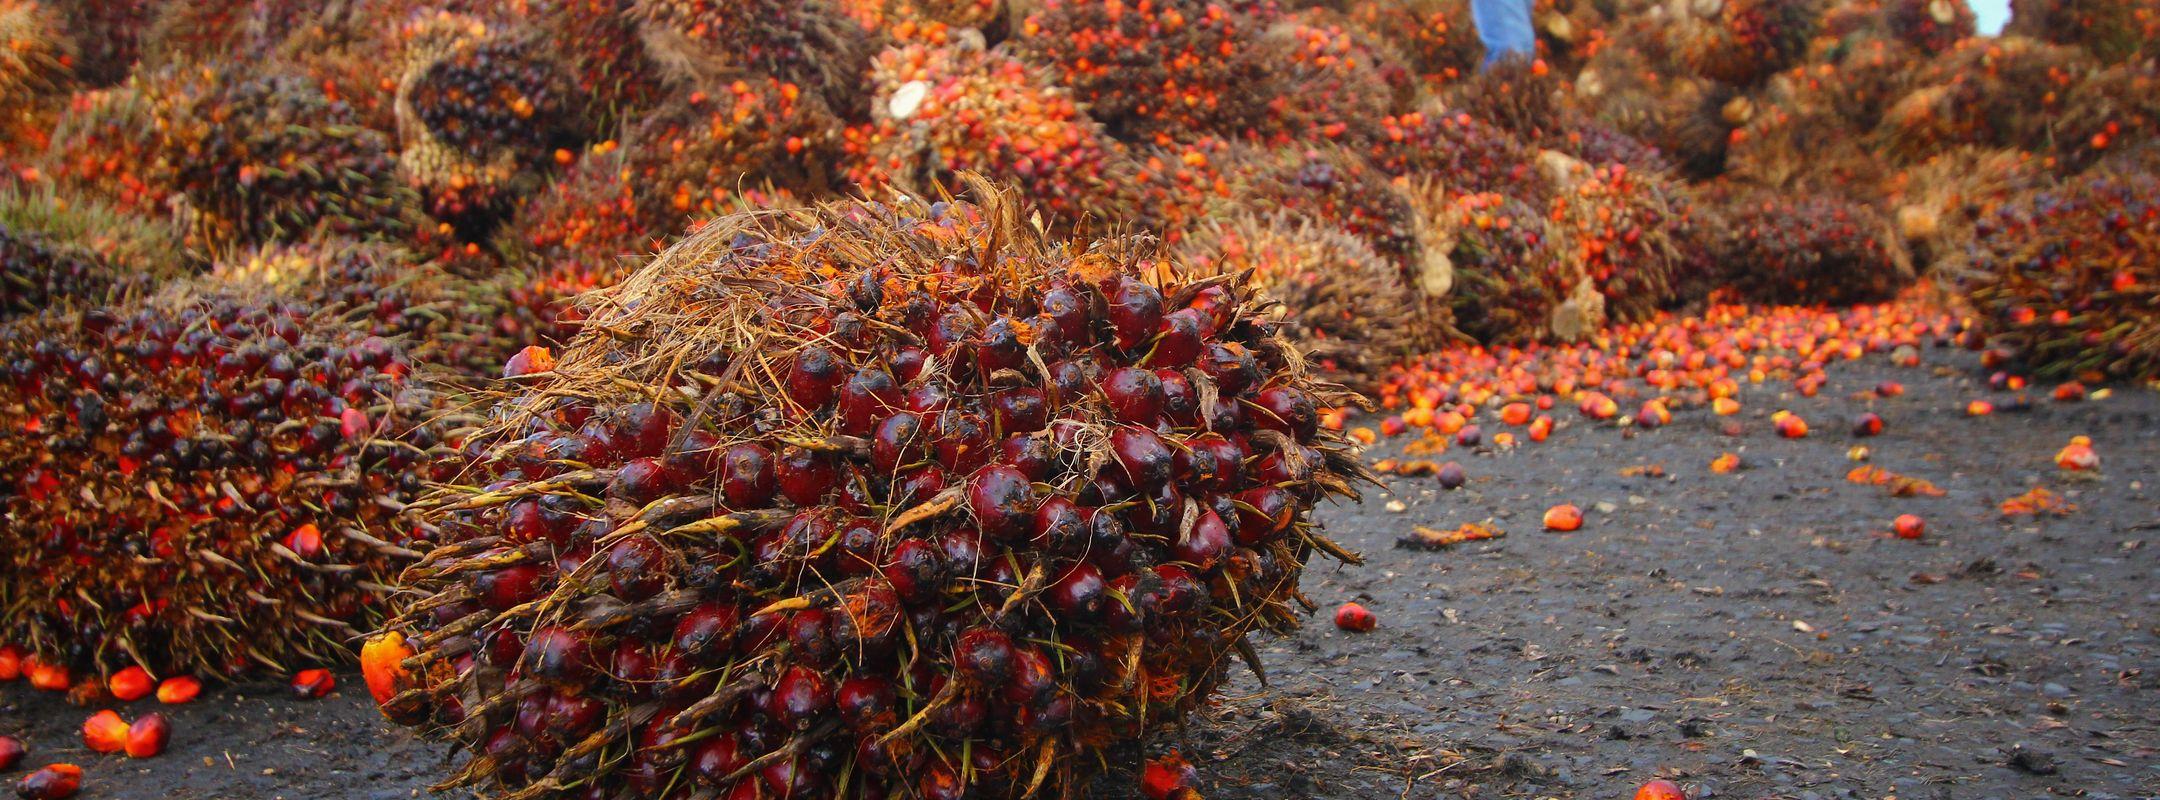 Oil palm, Indonesia